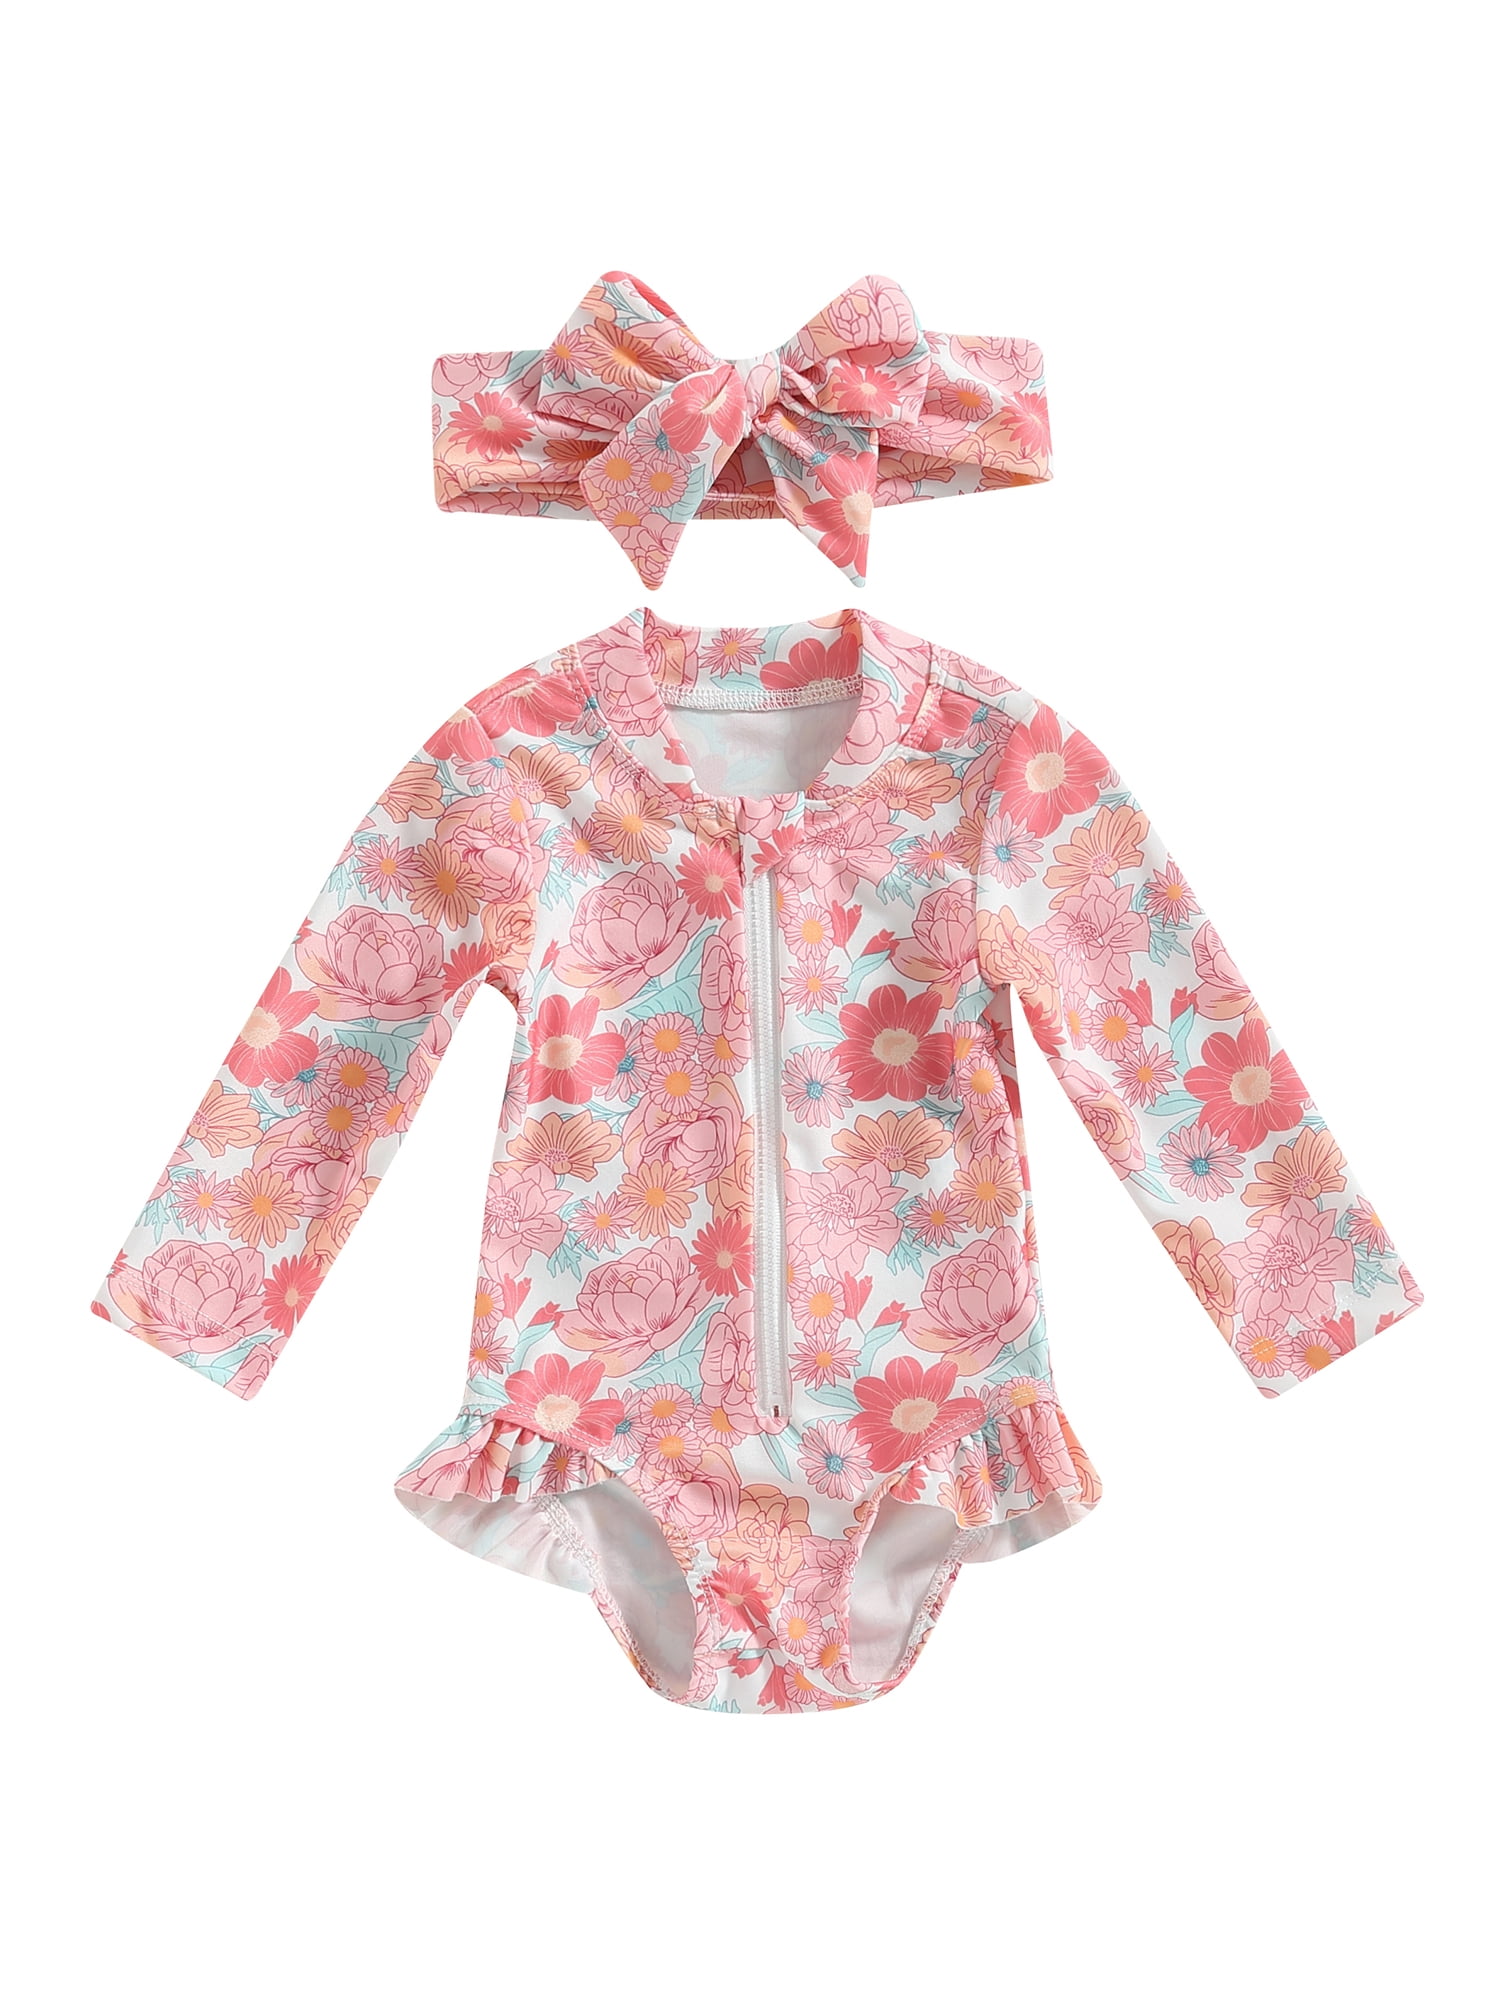 Springcmy Baby Girls Swimsuit One Piece Floral Zipper Ruffle Toddler ...